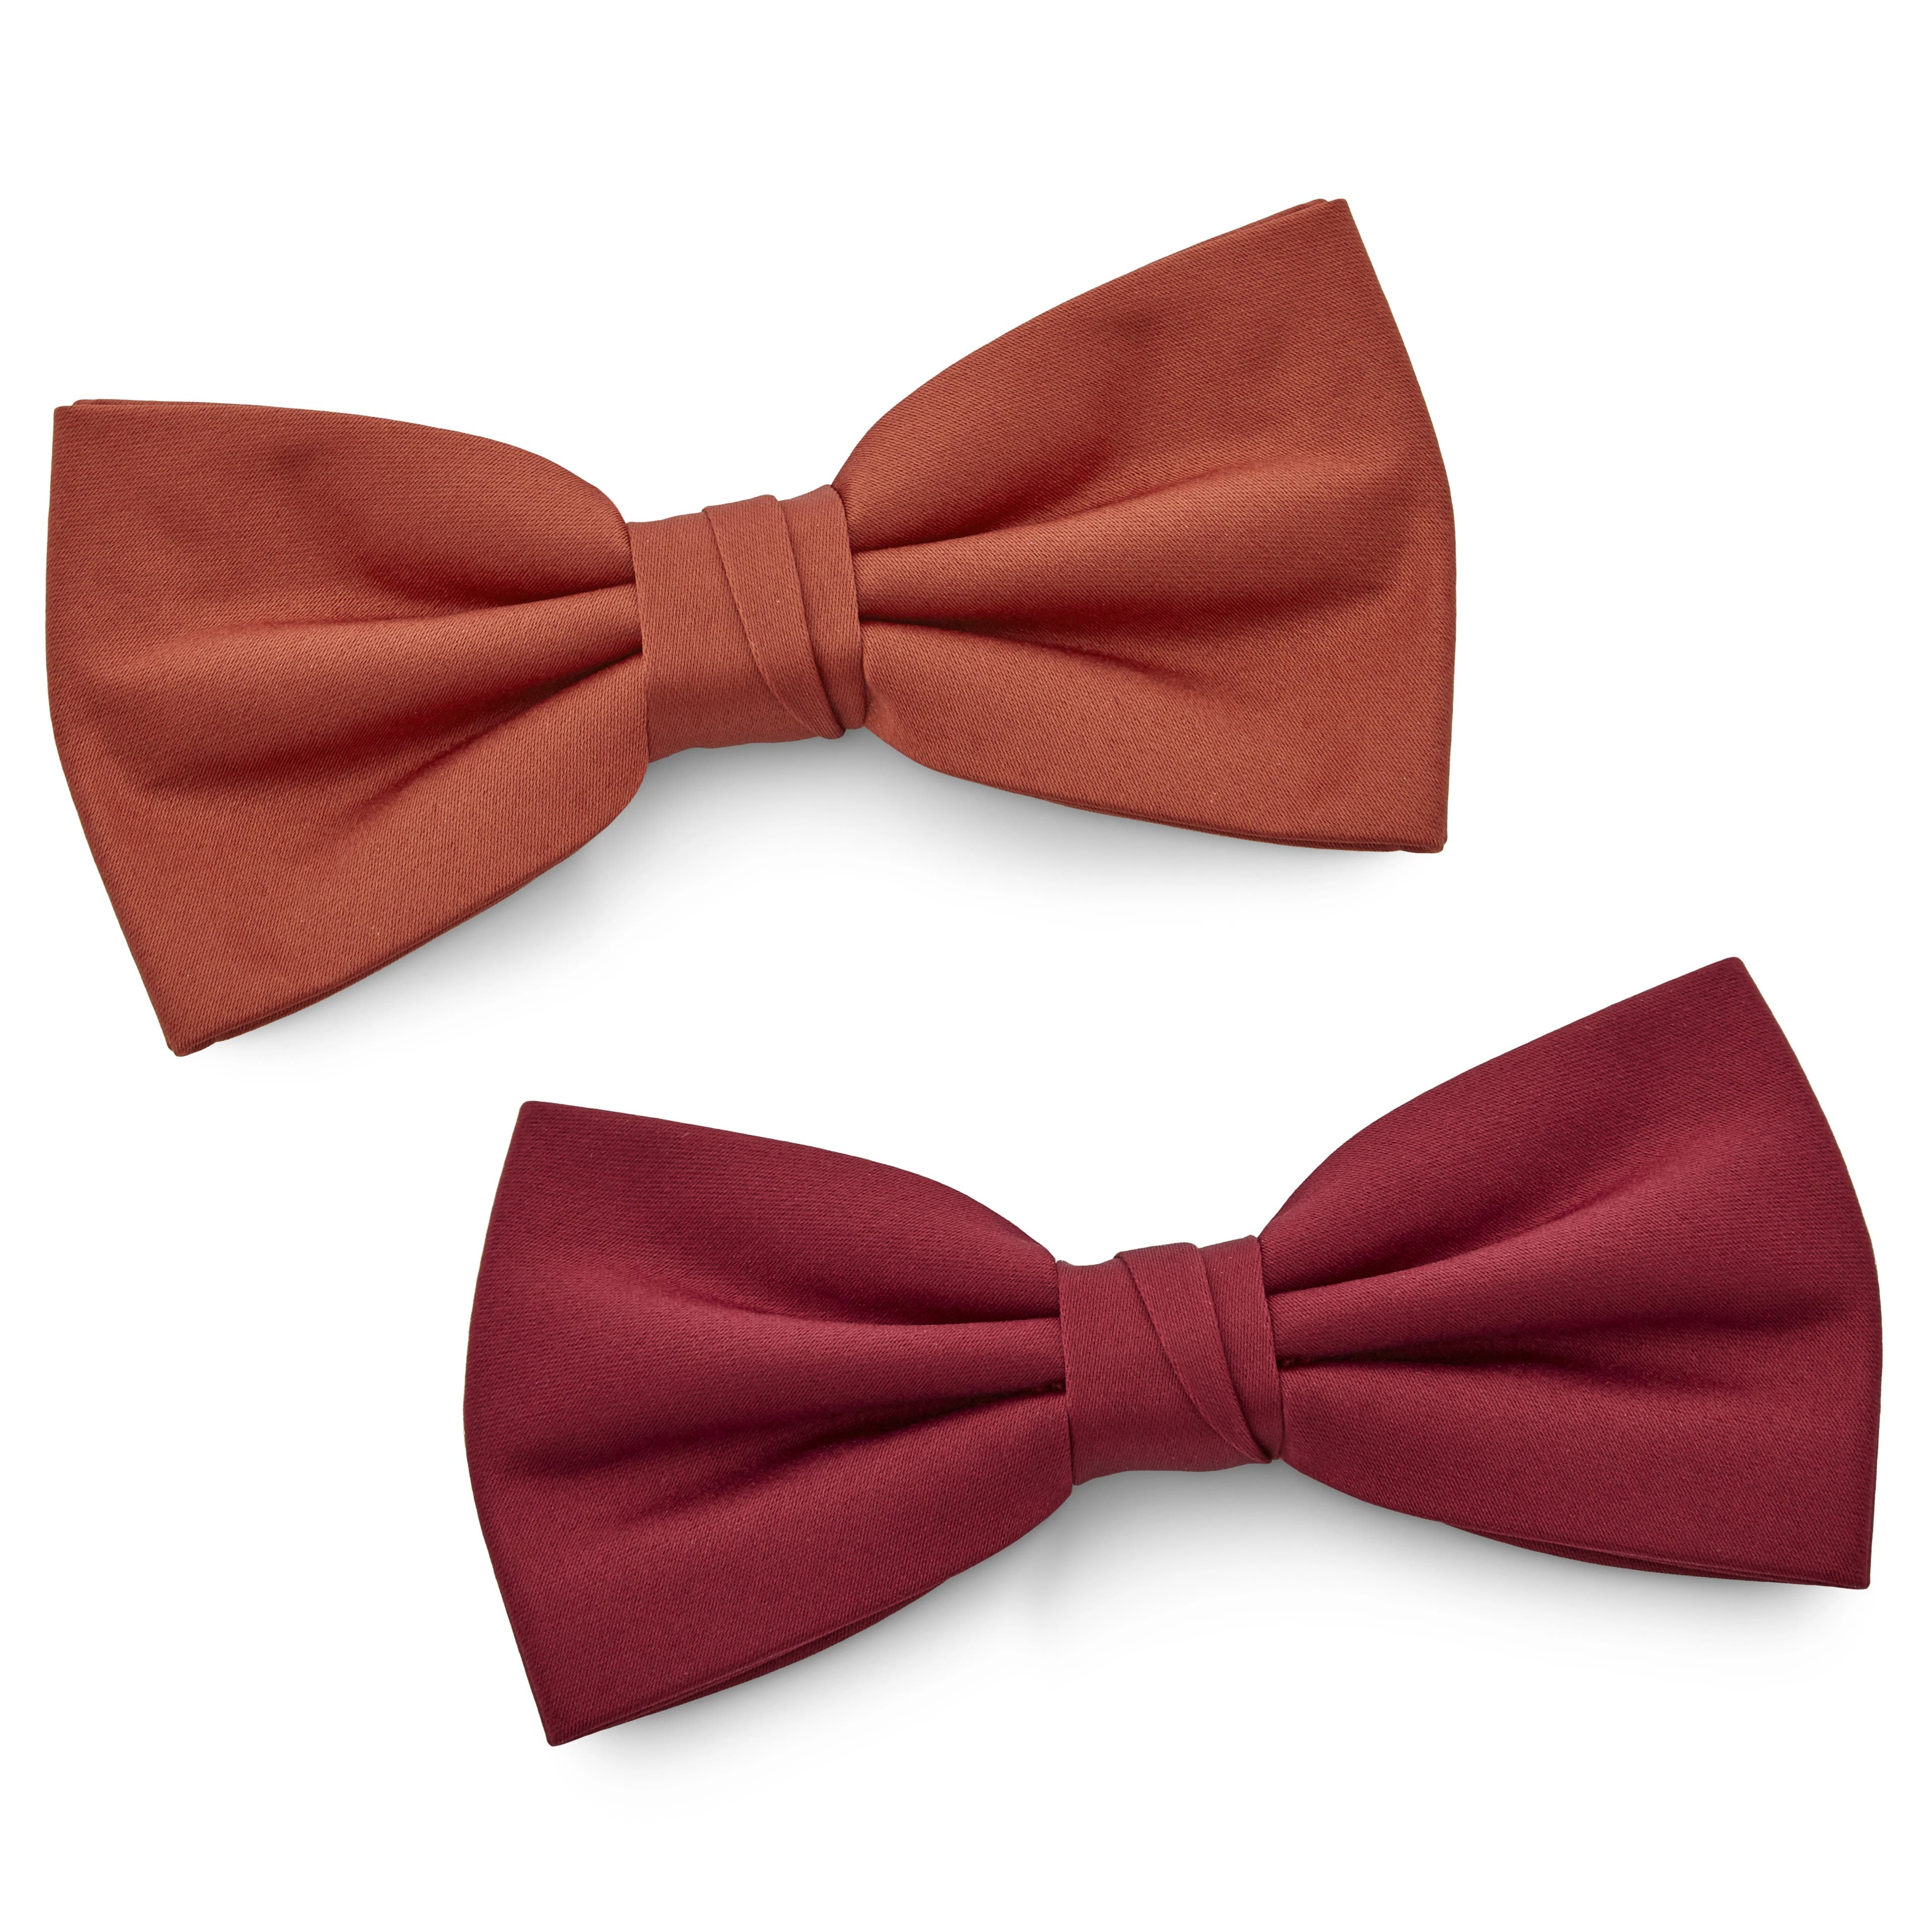 Terracotta and Burgundy Pre-Tied Bow Tie Set